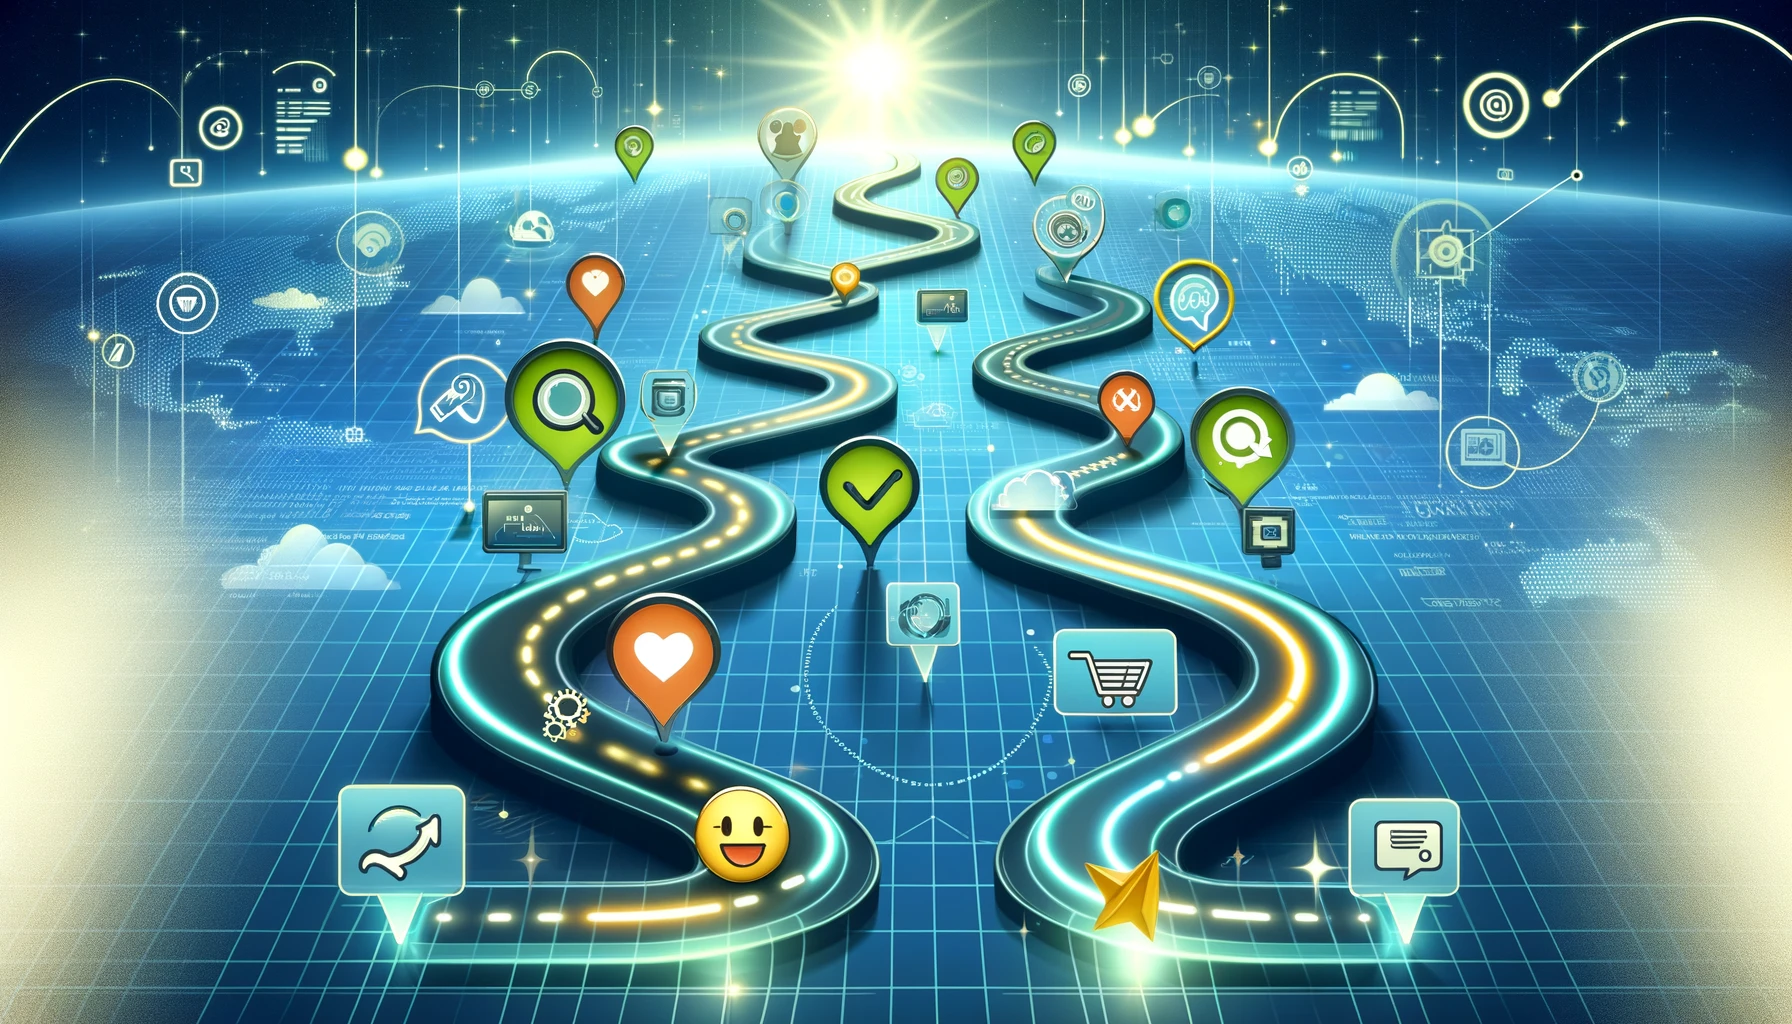 Image representing 'Digital Customer Journey', showing a path unfolding across a digital landscape with milestones like a search magnifying glass, shopping cart, chat bubble, and smiling emoji, symbolizing key interactions.